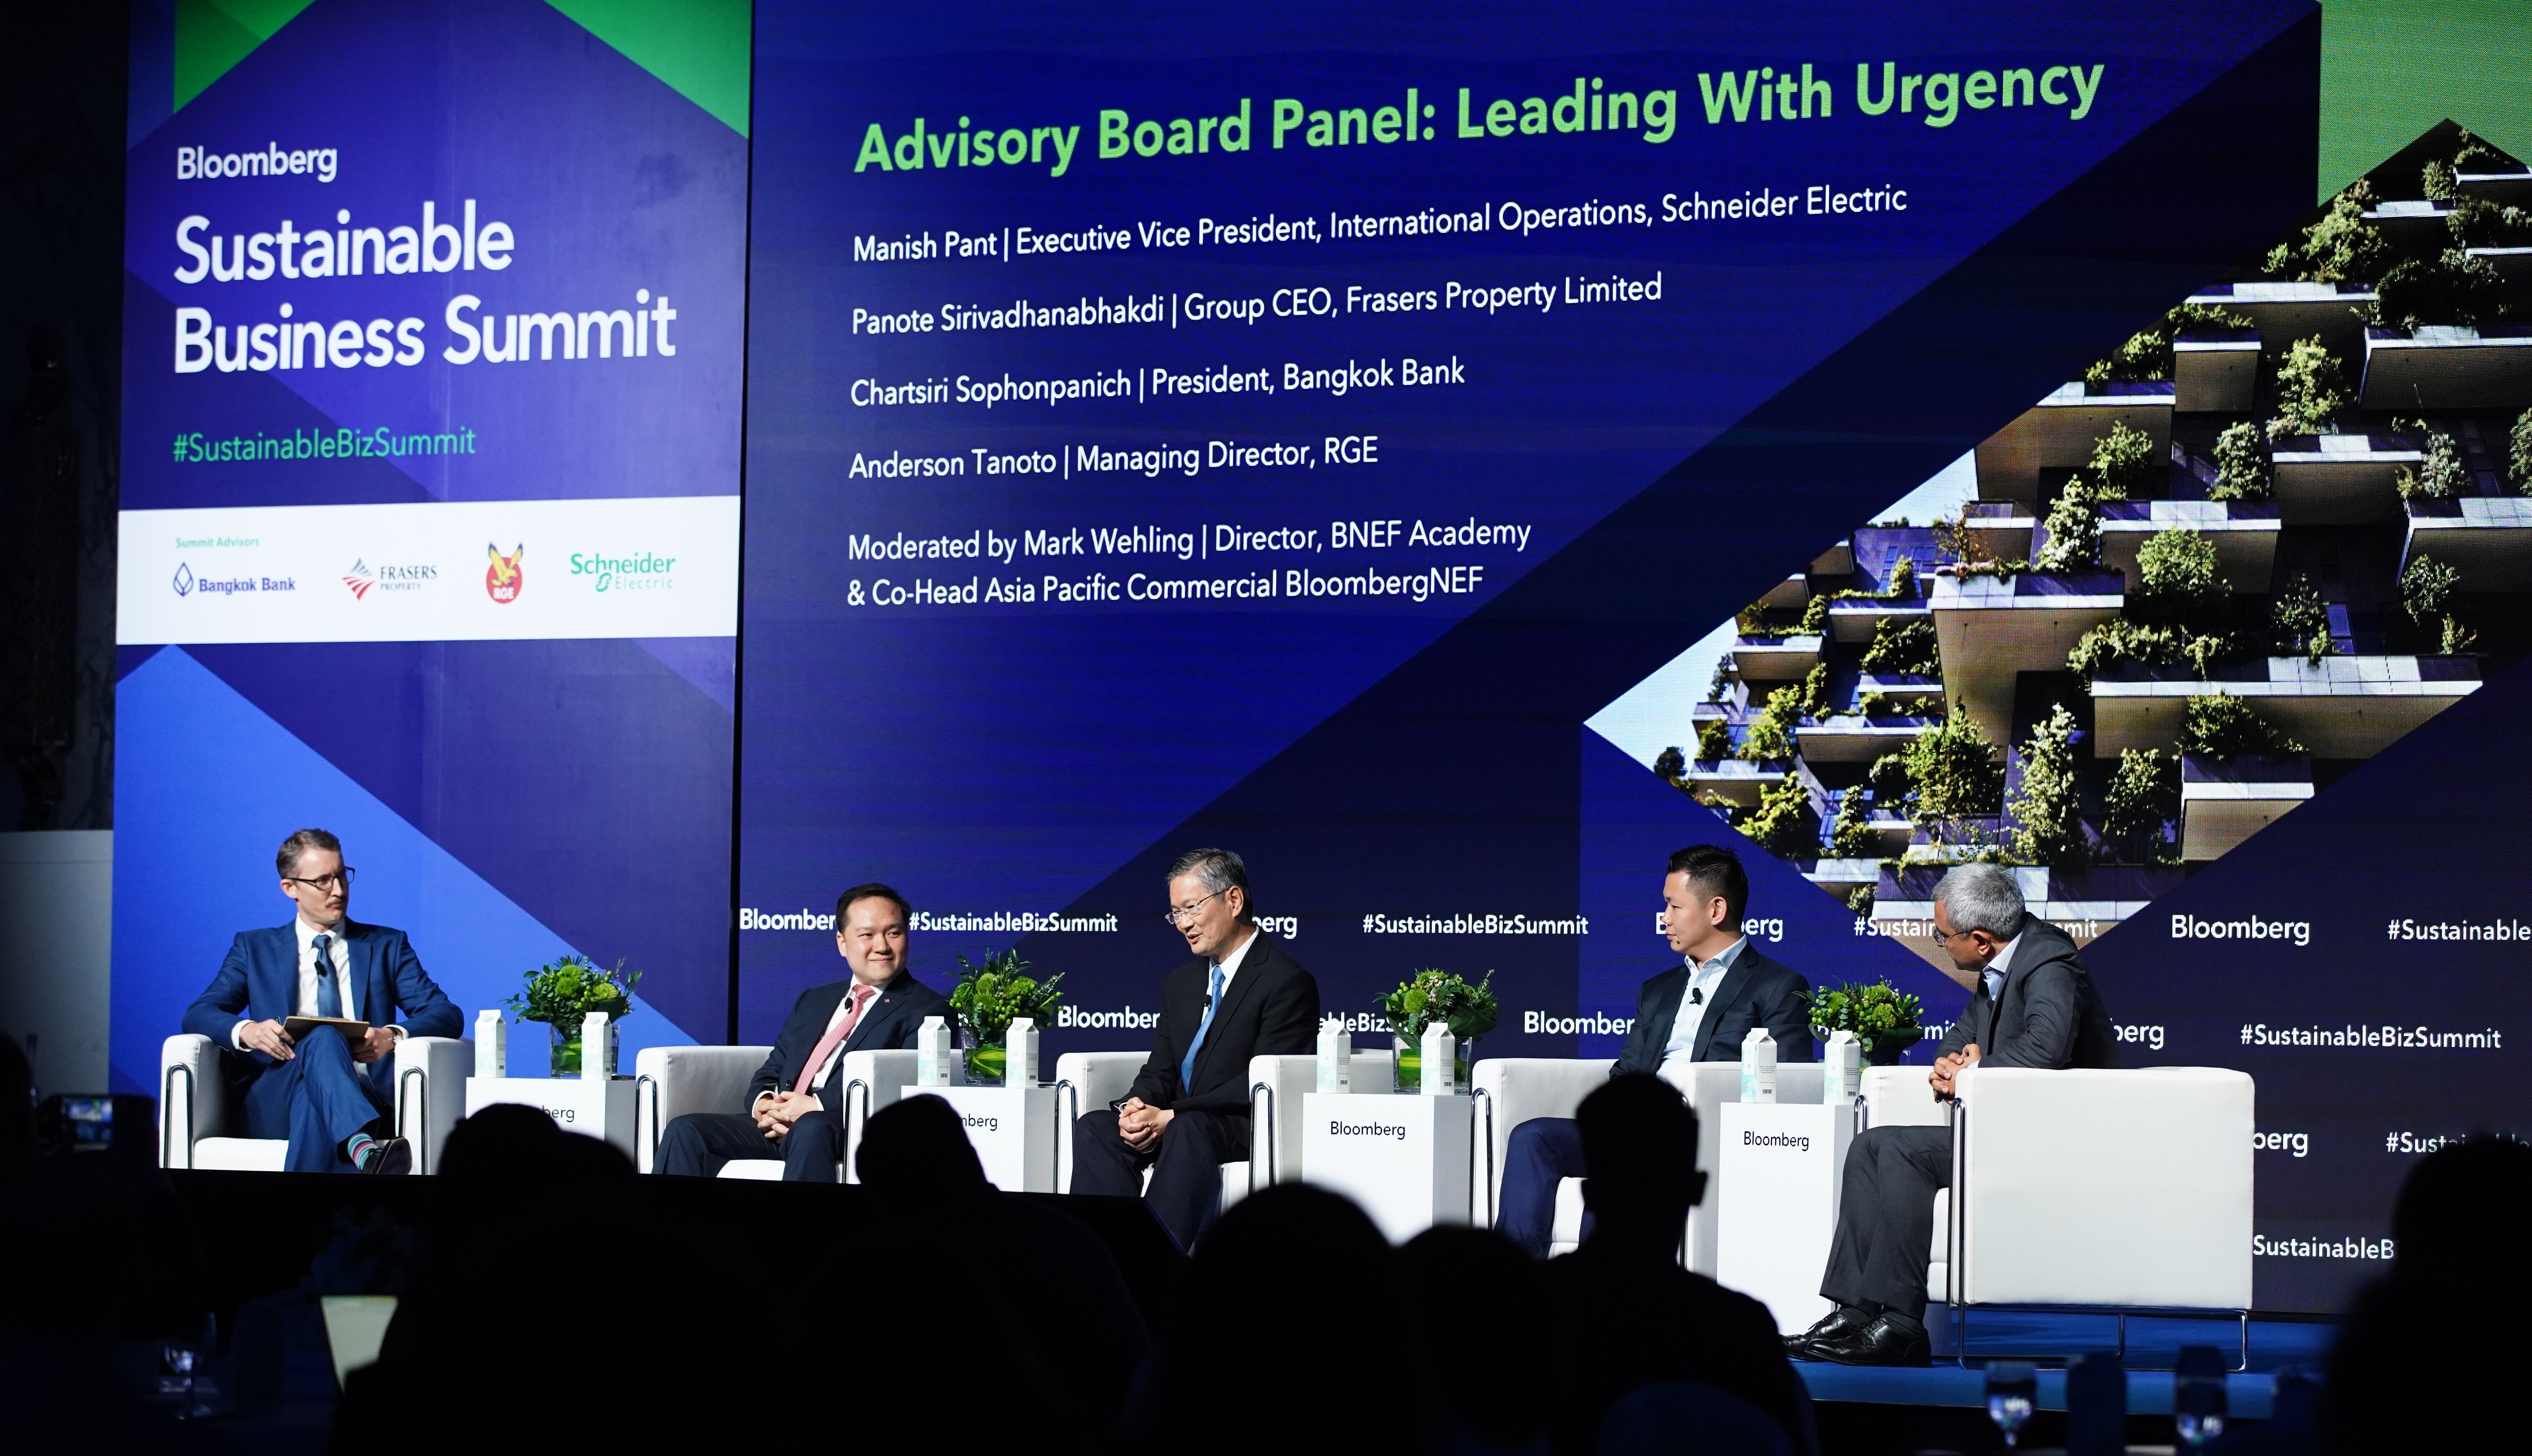 From left to right: Mark Wehling, Director, BNEF Academy & Co-Head, APAC Commercial, BloombergNEF; Panote Sirivadhanabhakdi, Group CEO of Frasers Property Limited; Chartsiri Sophonpanich, President of Bangkok Bank; Anderson Tanoto, Managing Director of RGE; Manish Pant, Executive Vice President, International Operations at Schneider Electric.